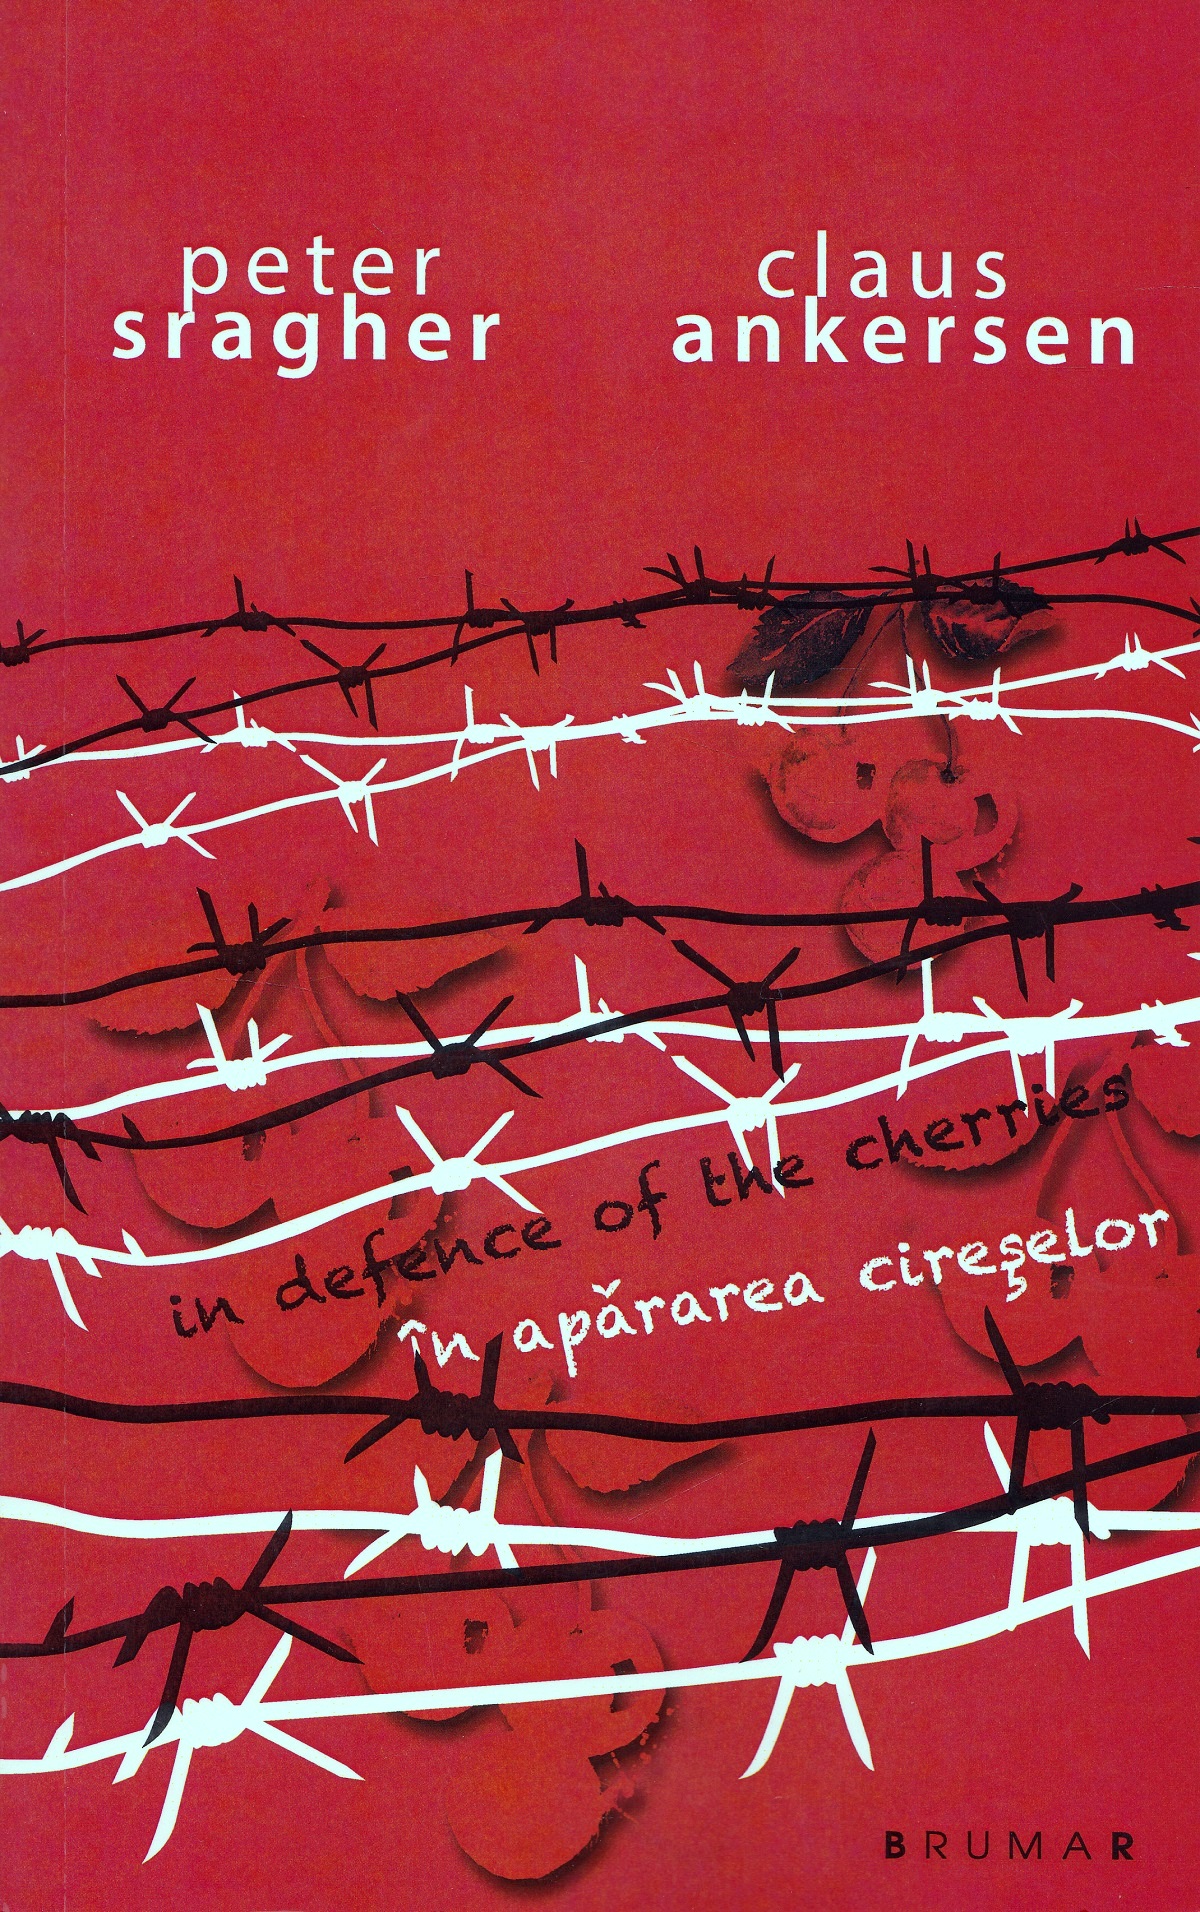 In apararea cireselor. In defence of the cherries - Peter Sragher, Claus Ankersen 